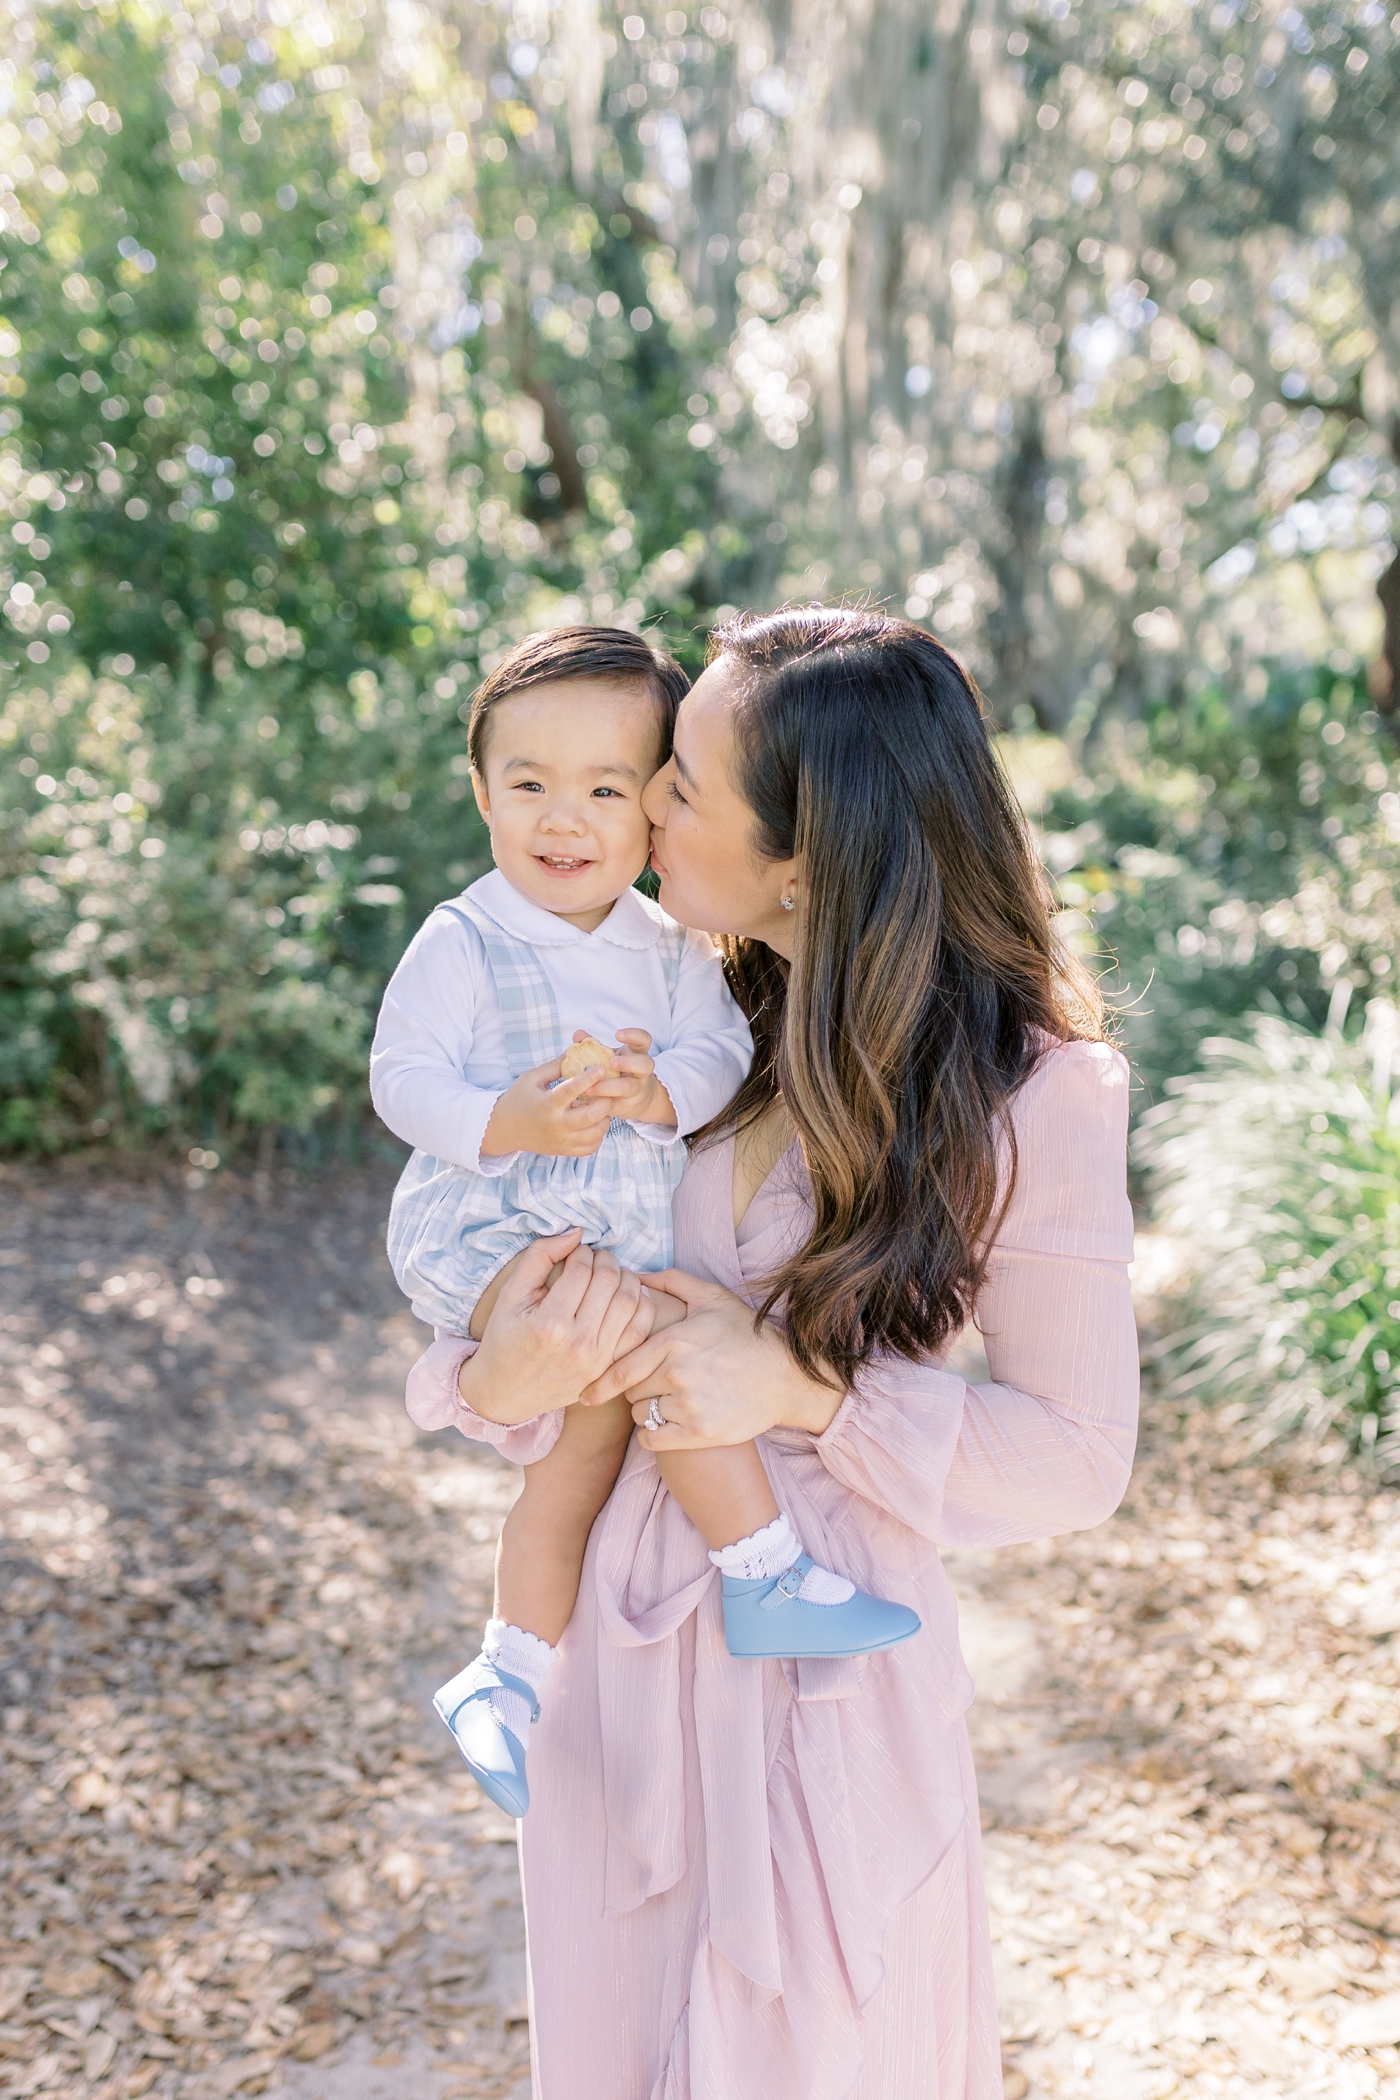 Mom kissing baby boy in blue on the cheek | Photo by Caitlyn Motycka Photography